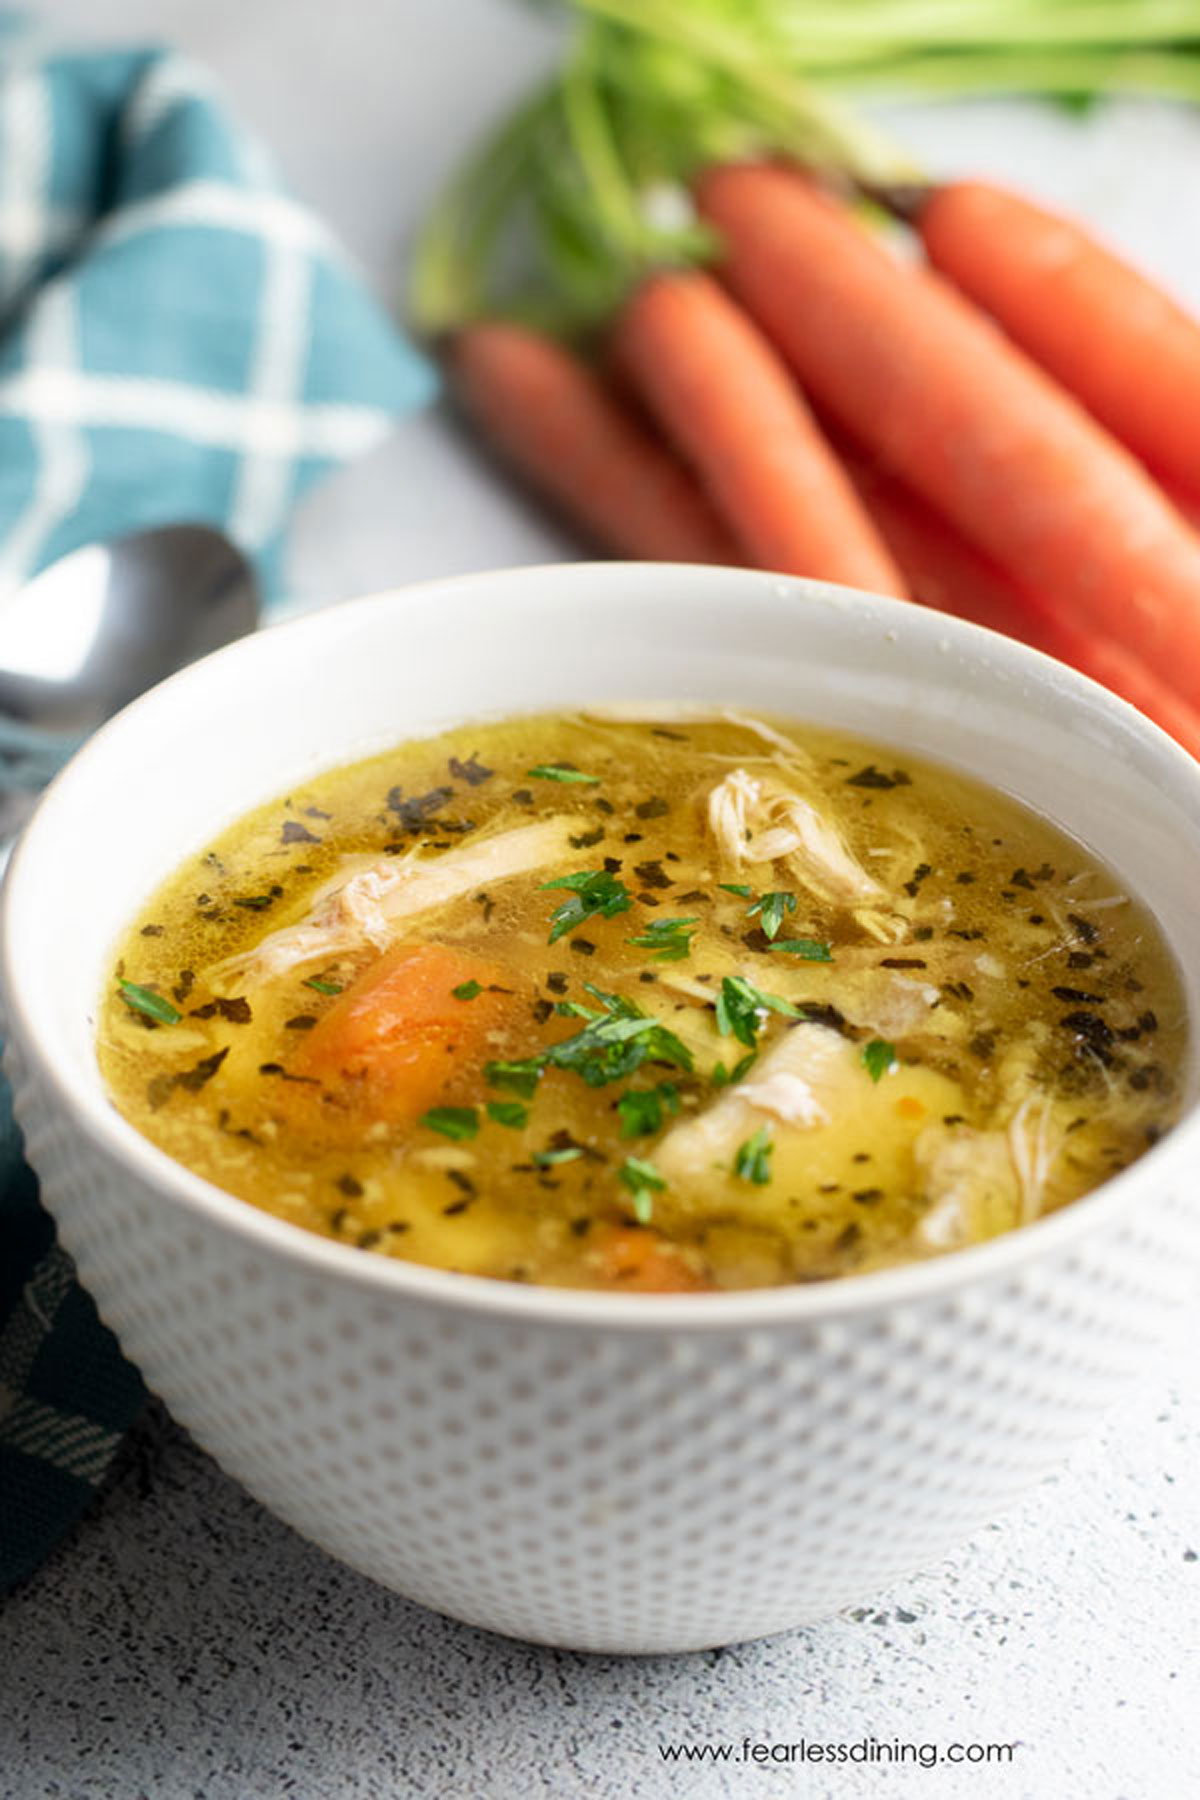 Grandma's Homemade Chicken Noodle Soup (Stovetop or Pressure